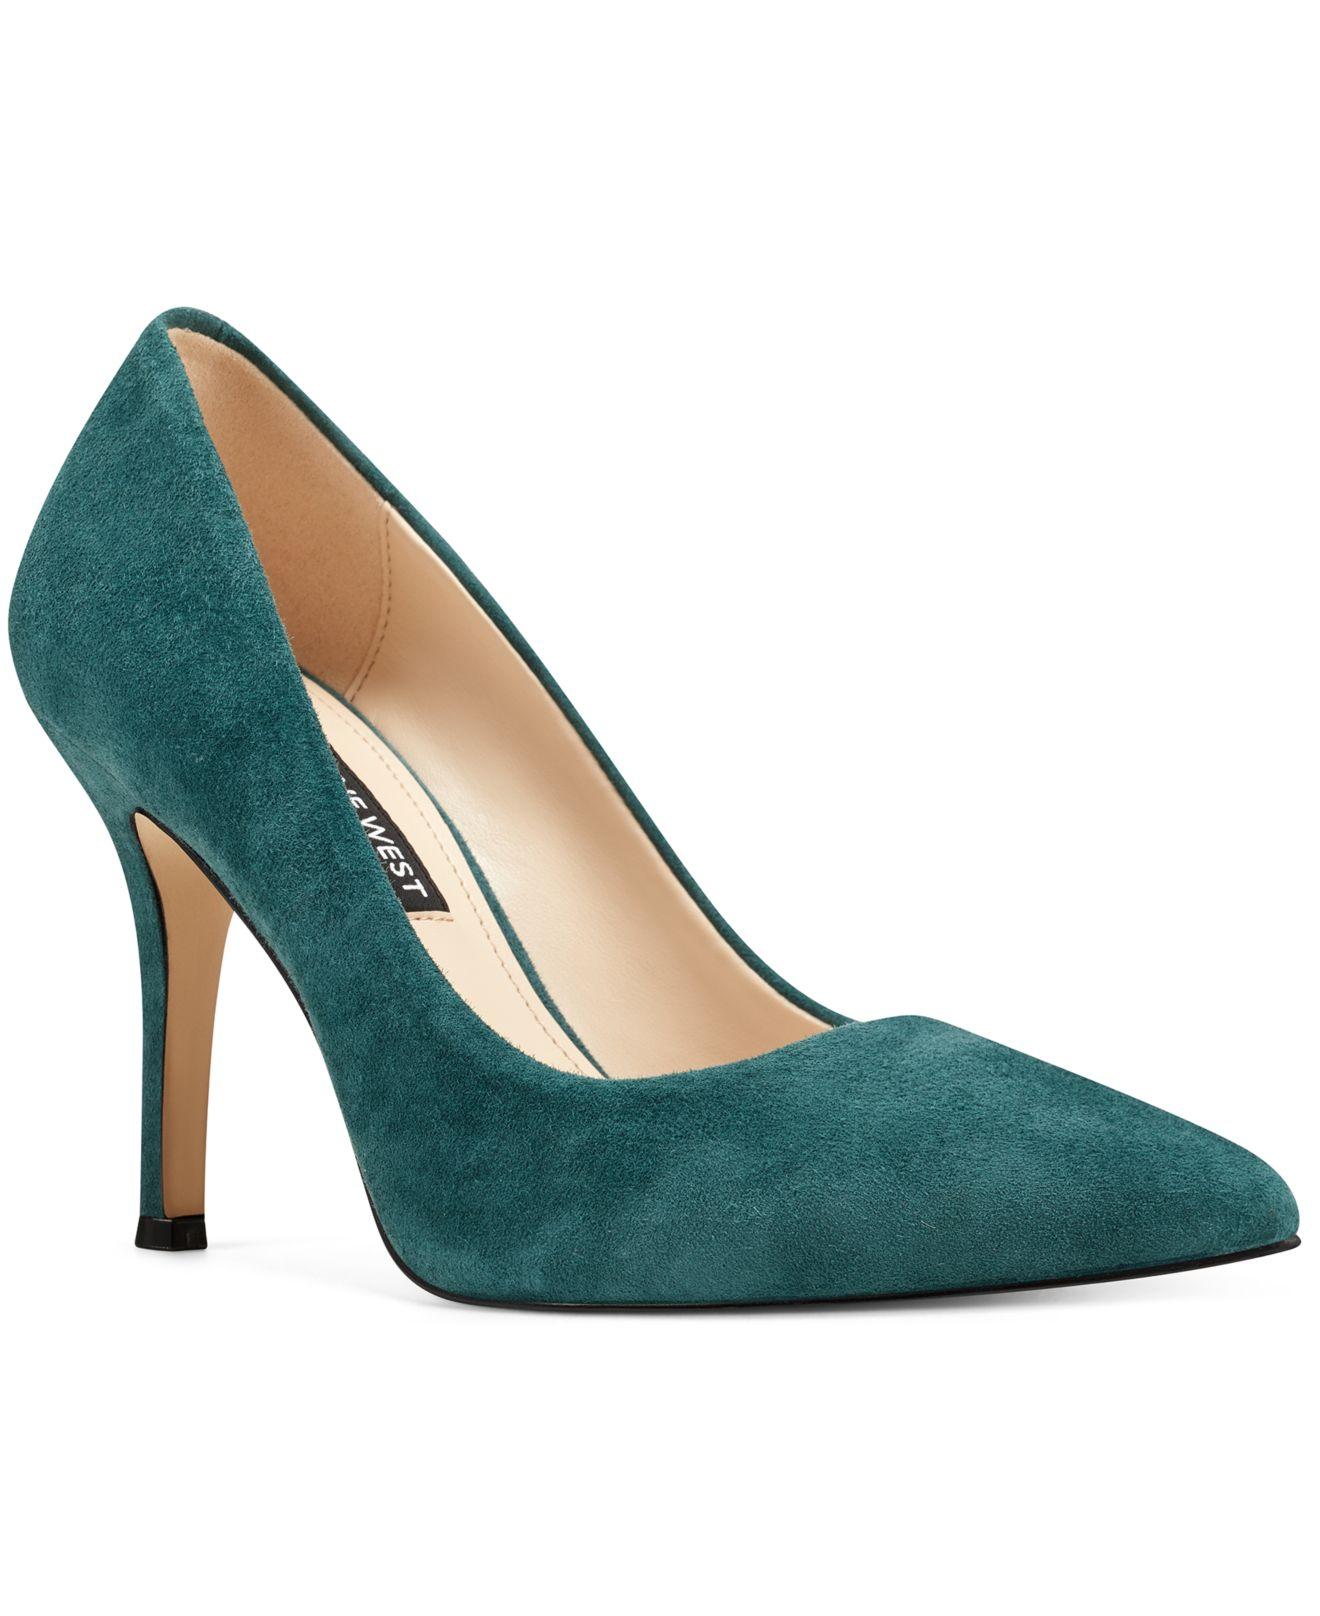 West Flax Pumps in Green | Lyst